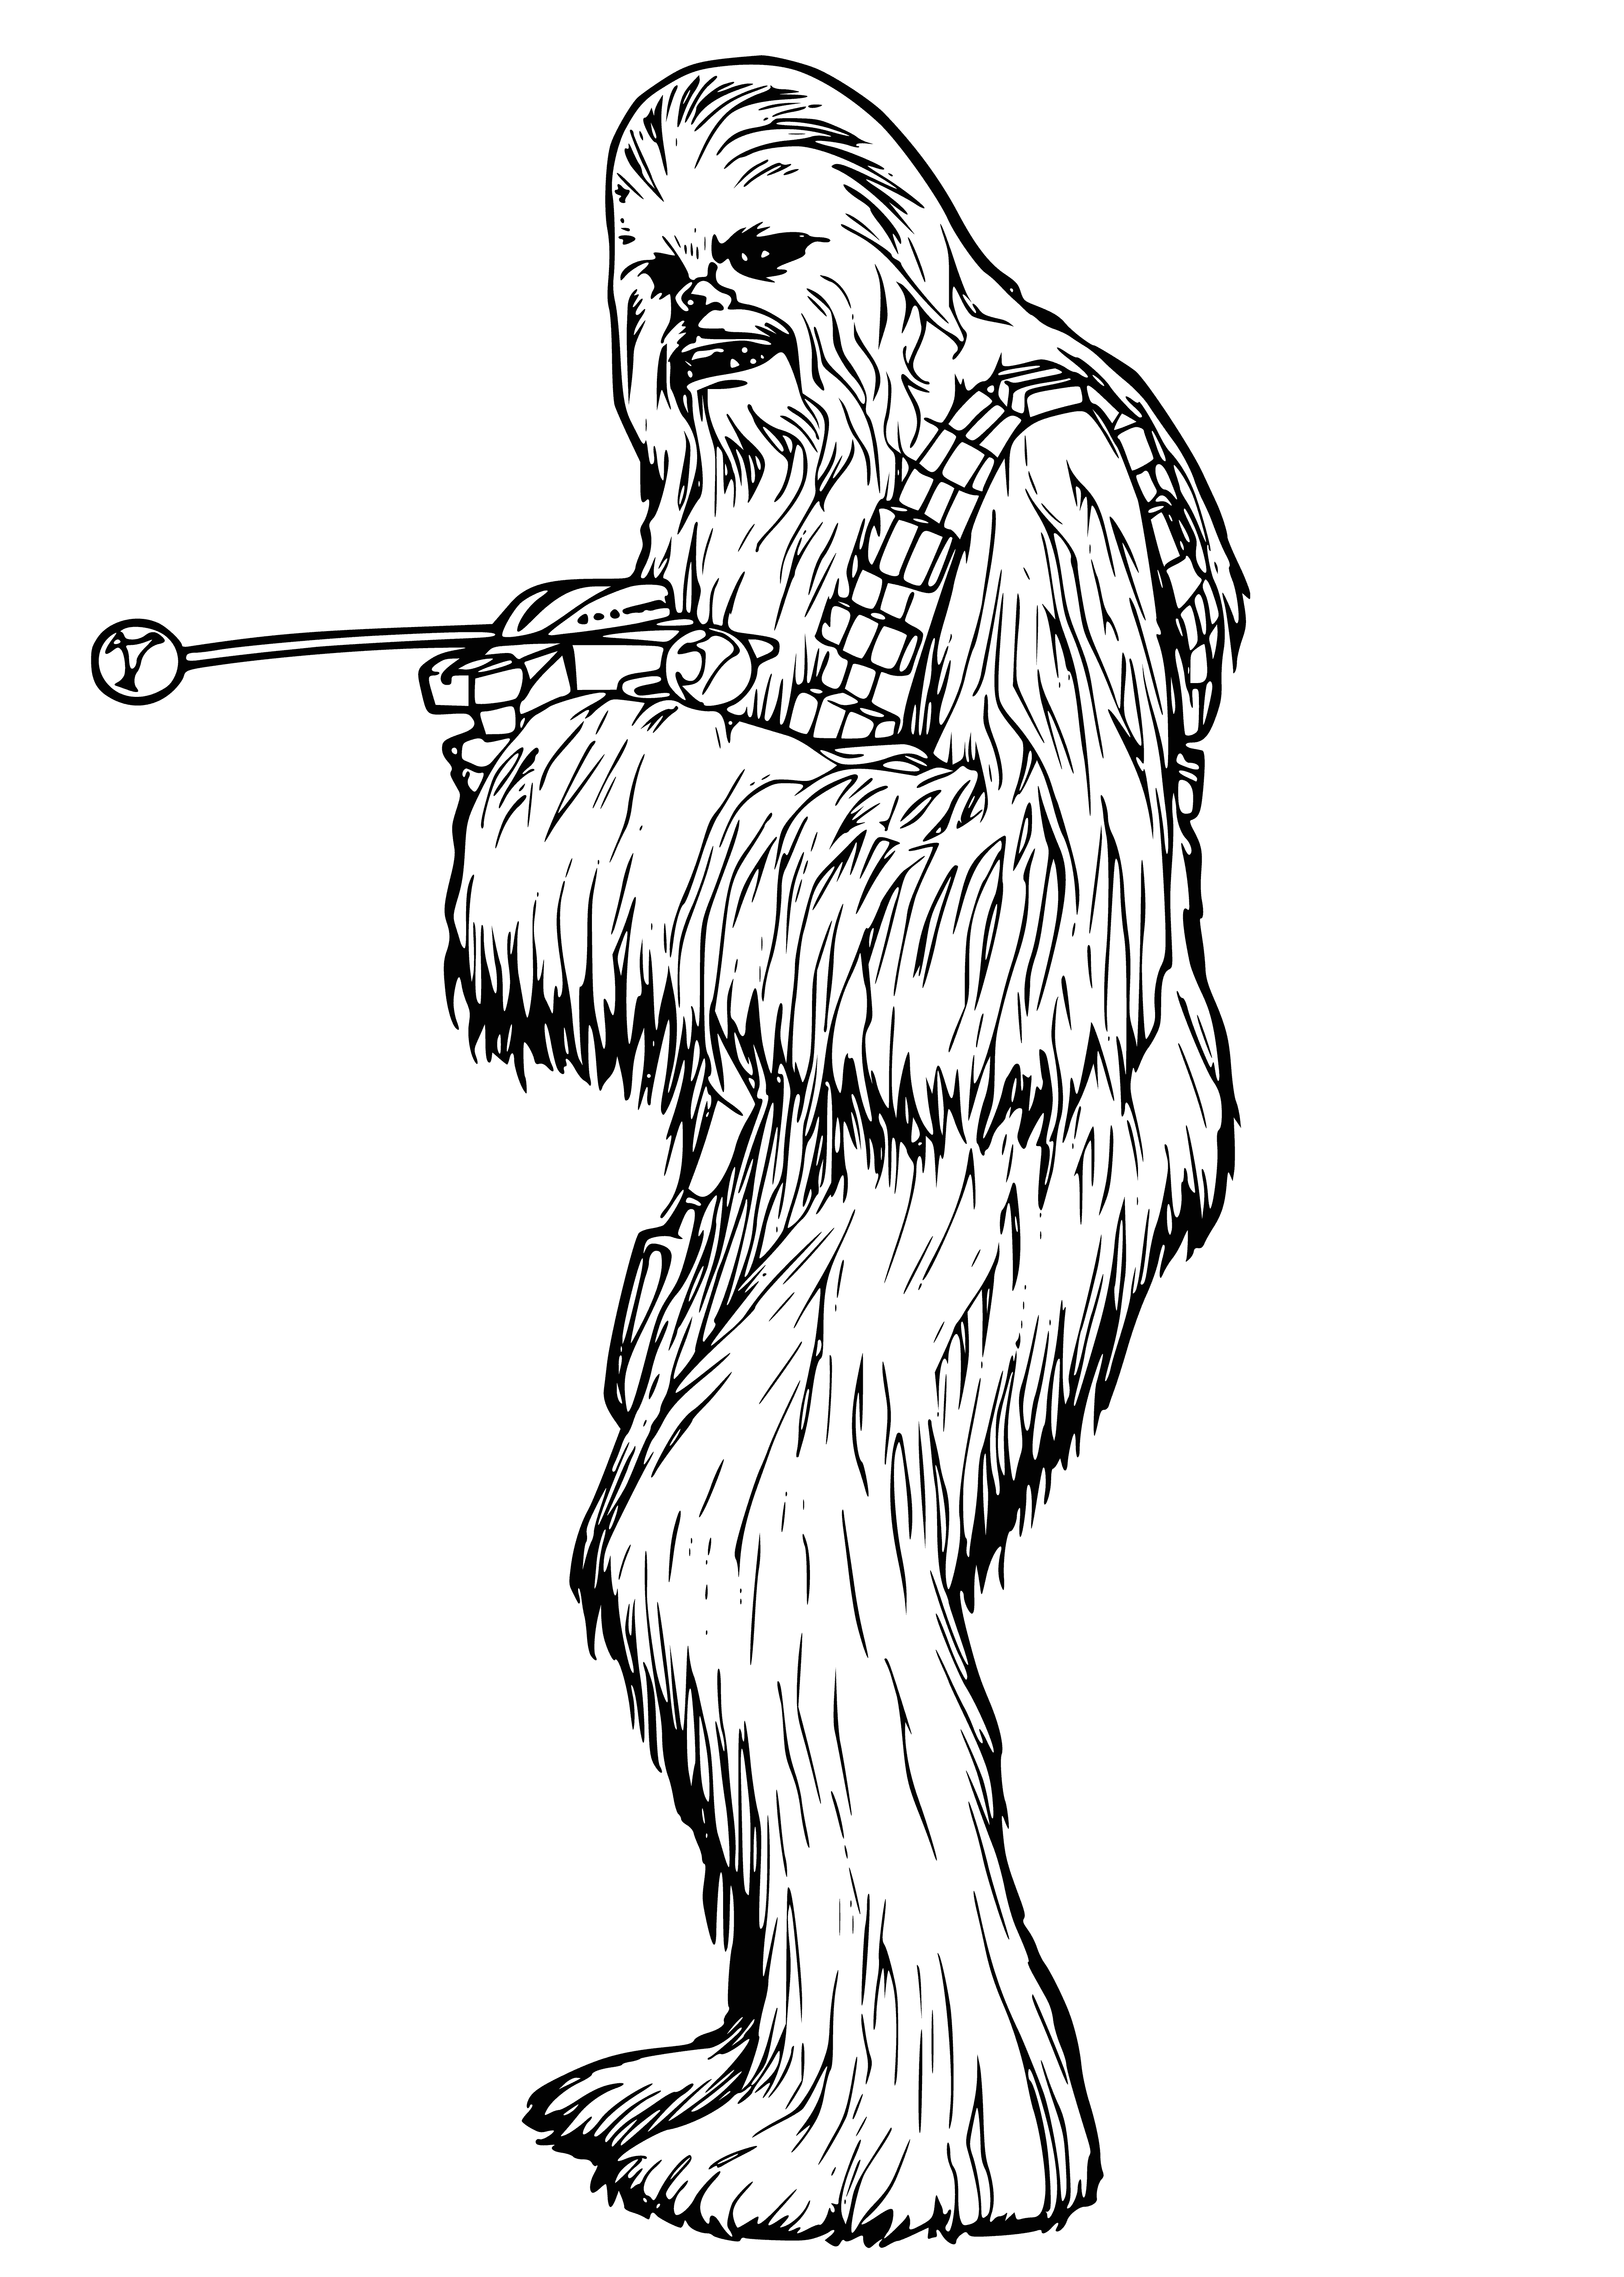 coloring page: Chubaka is a small, furry Star Wars character seen aiding Darth Vader in the quest to capture Luke Skywalker (Return of the Jedi).